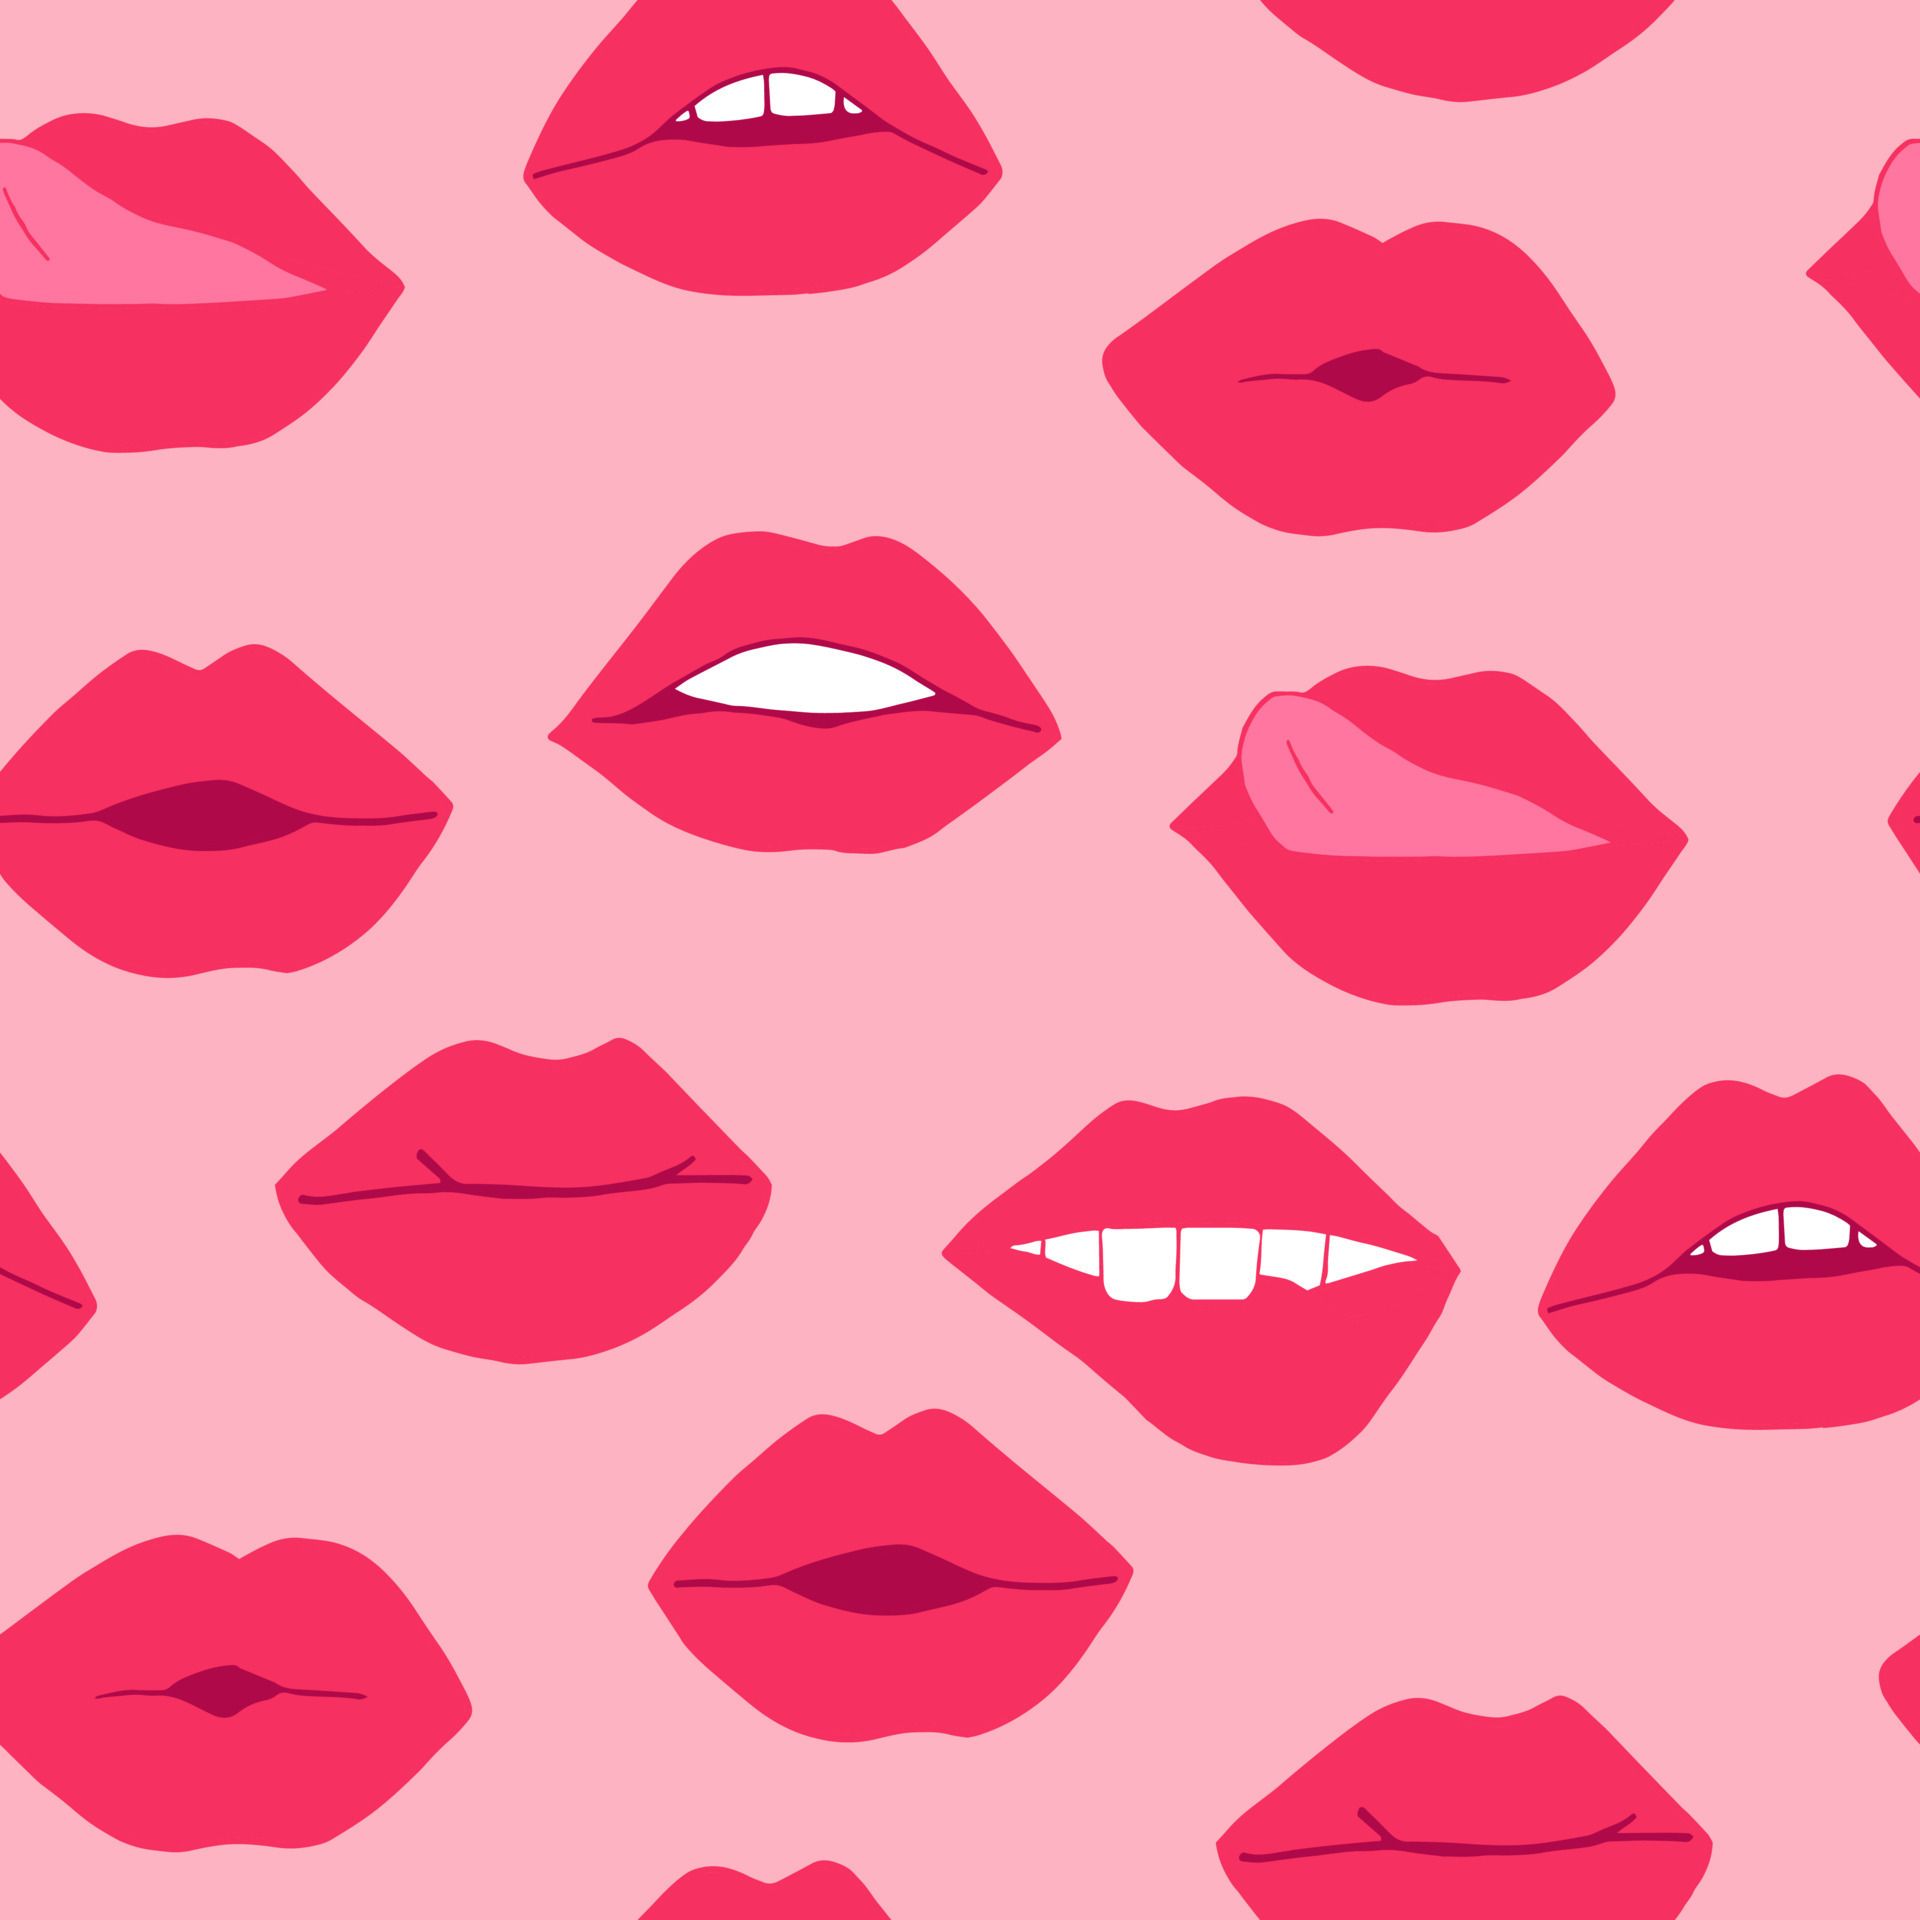 A pattern of pink lips on a pink background - Lips